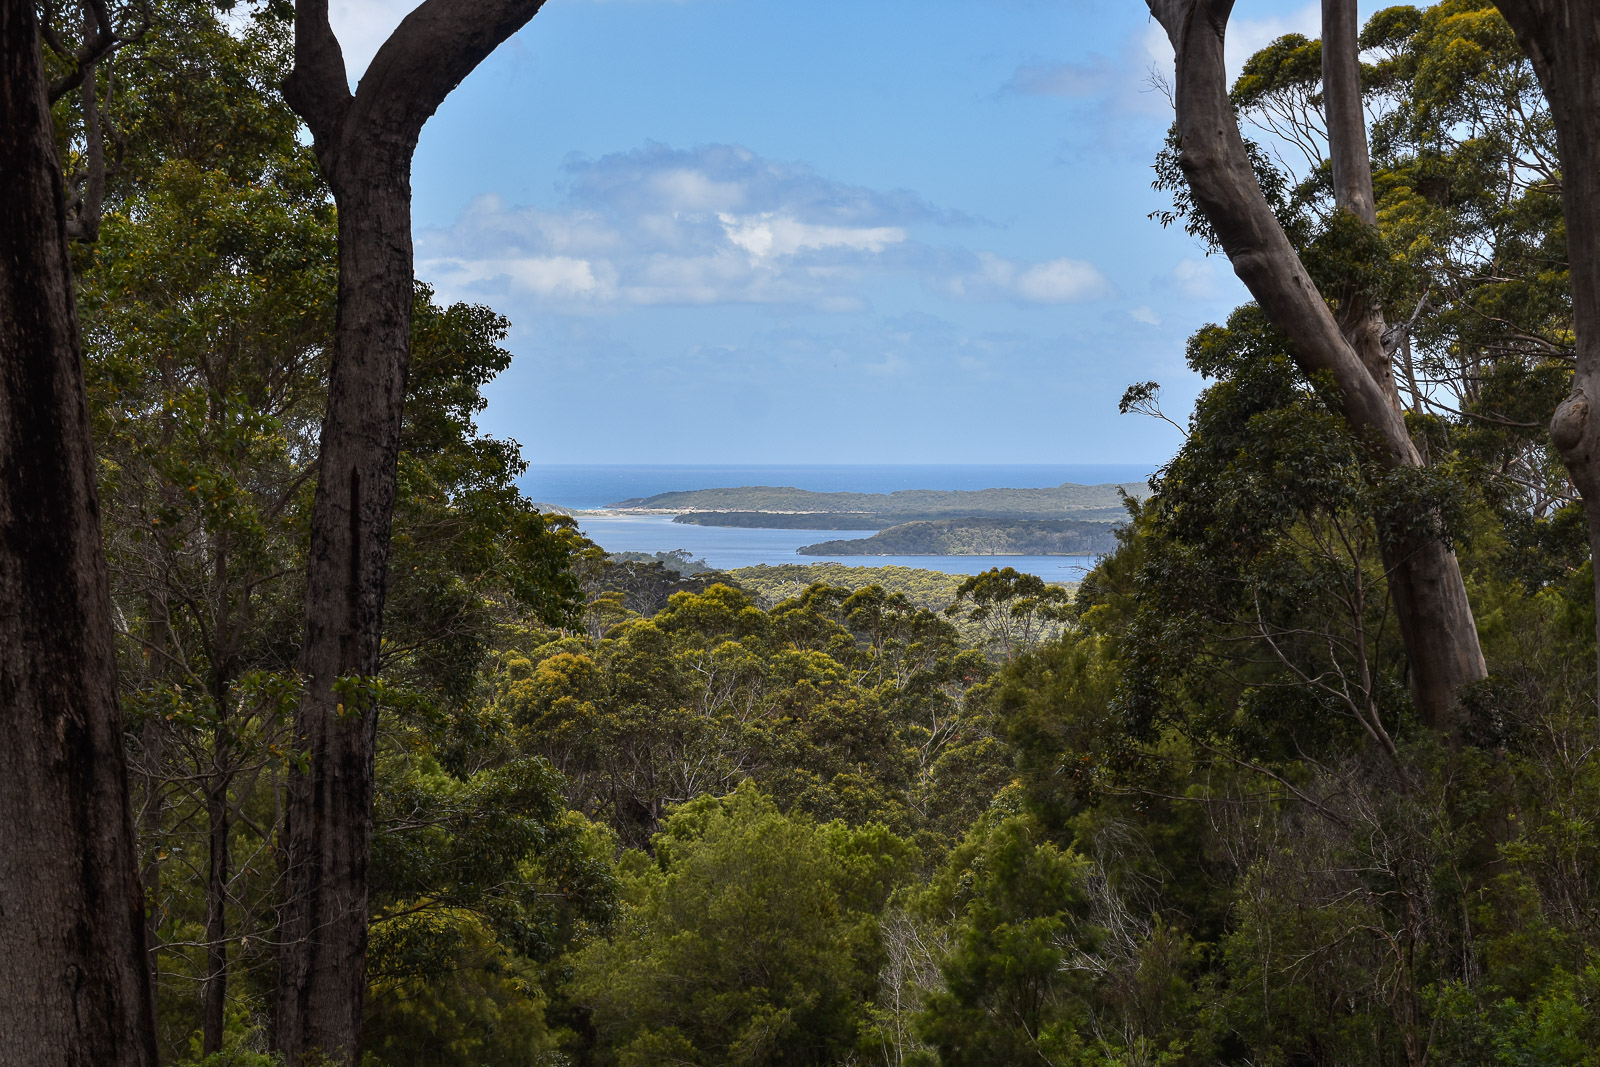 A coastal view framed by trees